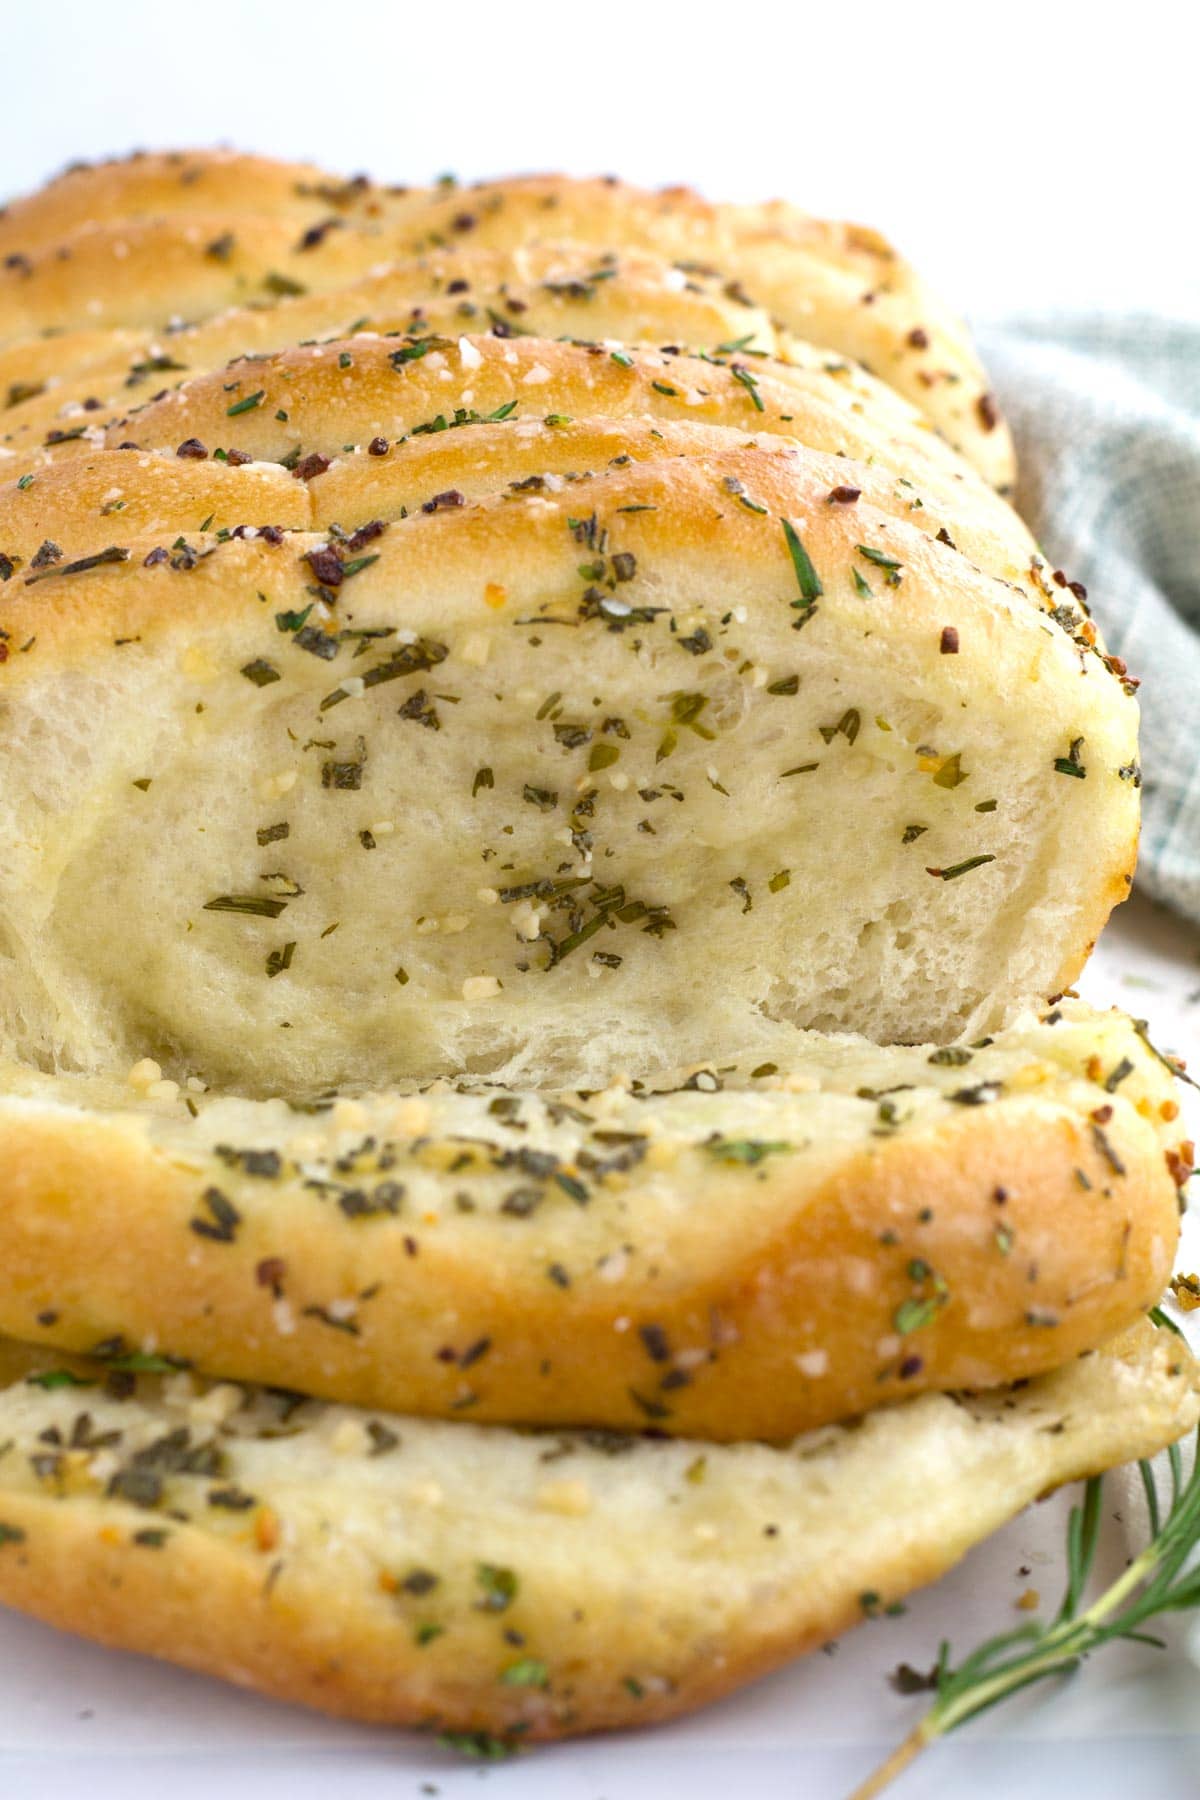 Slices of pull apart bread with garlic and herbs on a countertop.